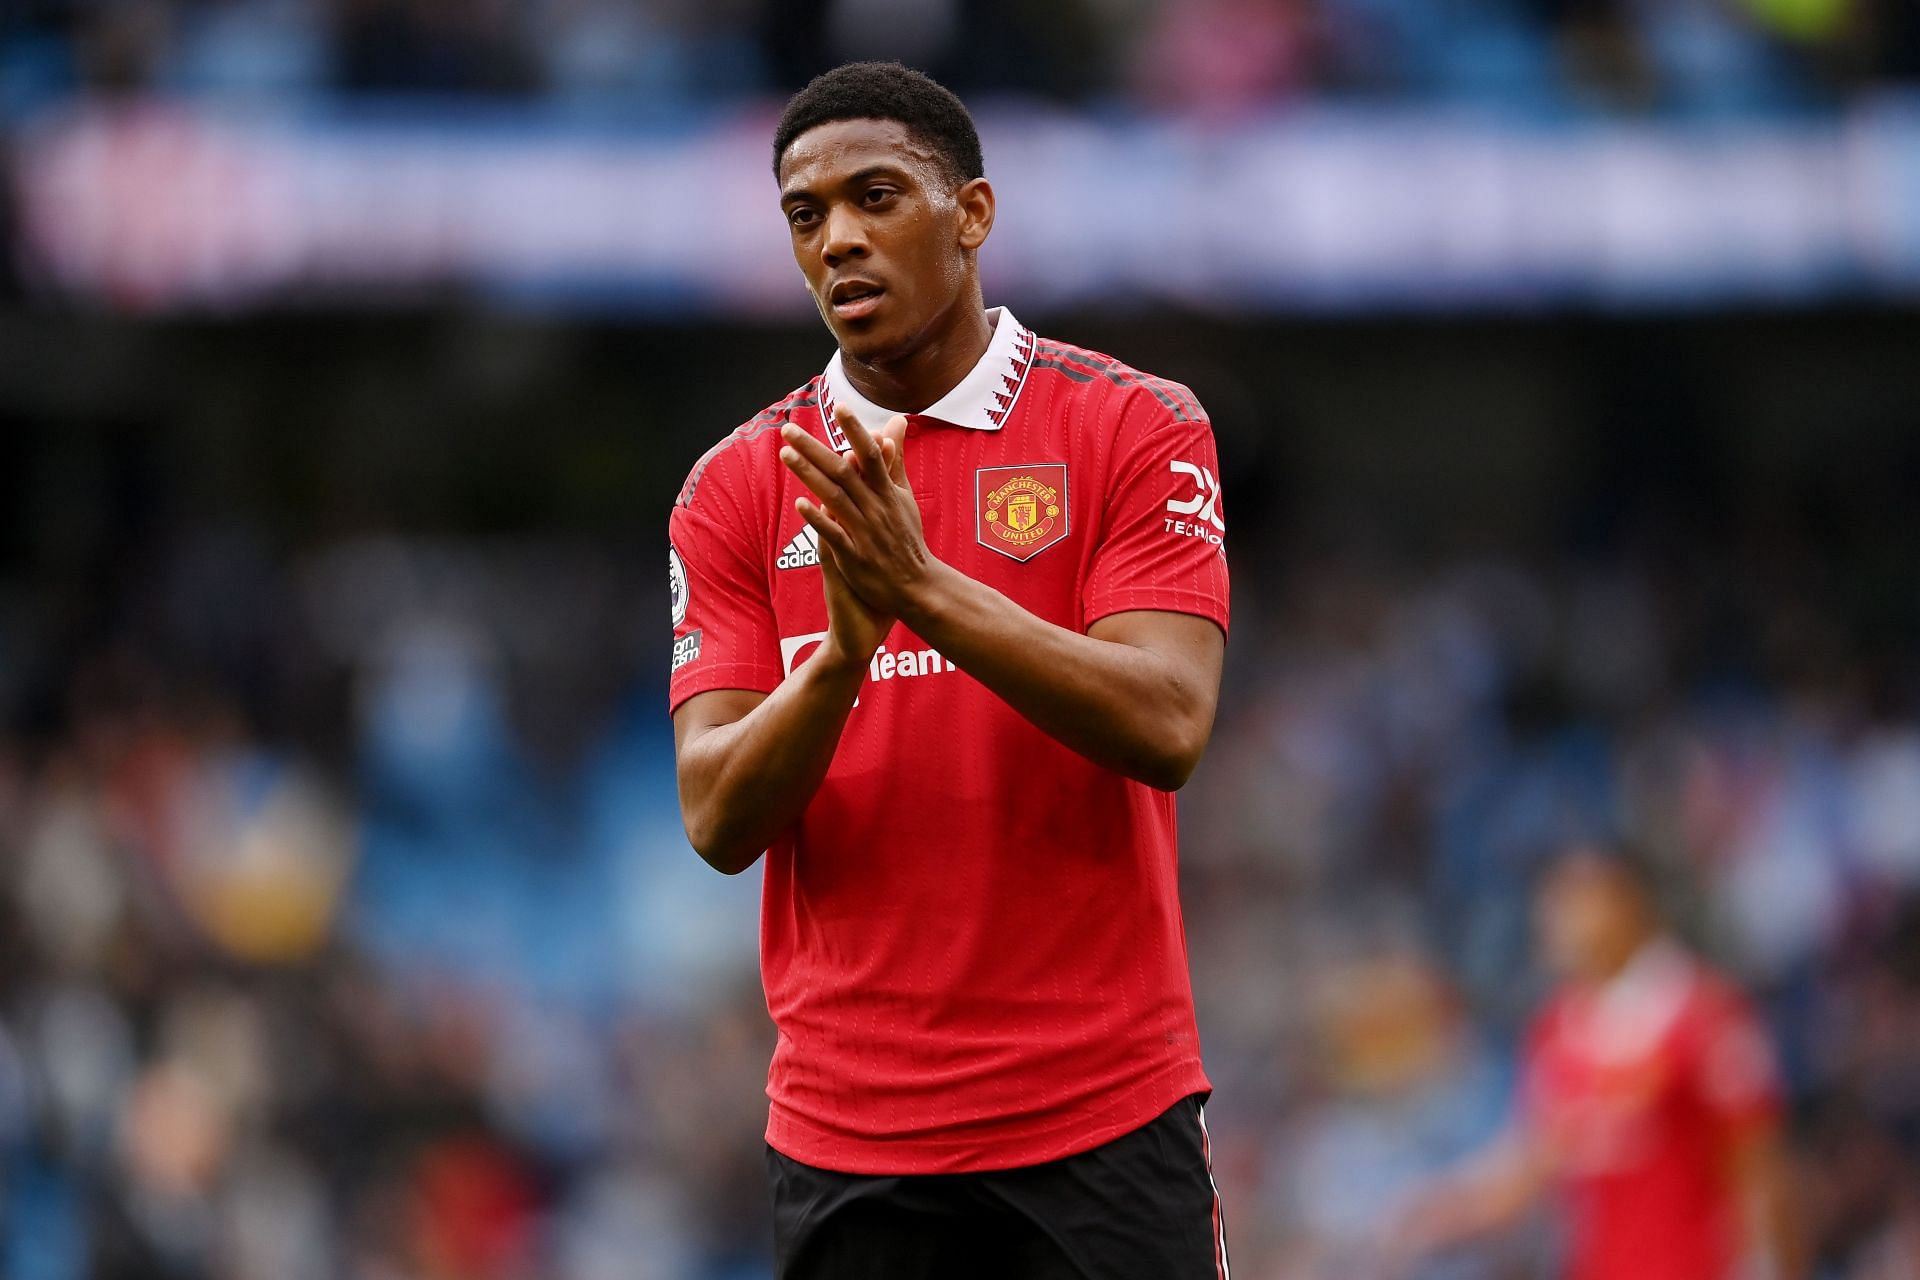 Anthony Martial has a key role to play at Old Trafford this season.